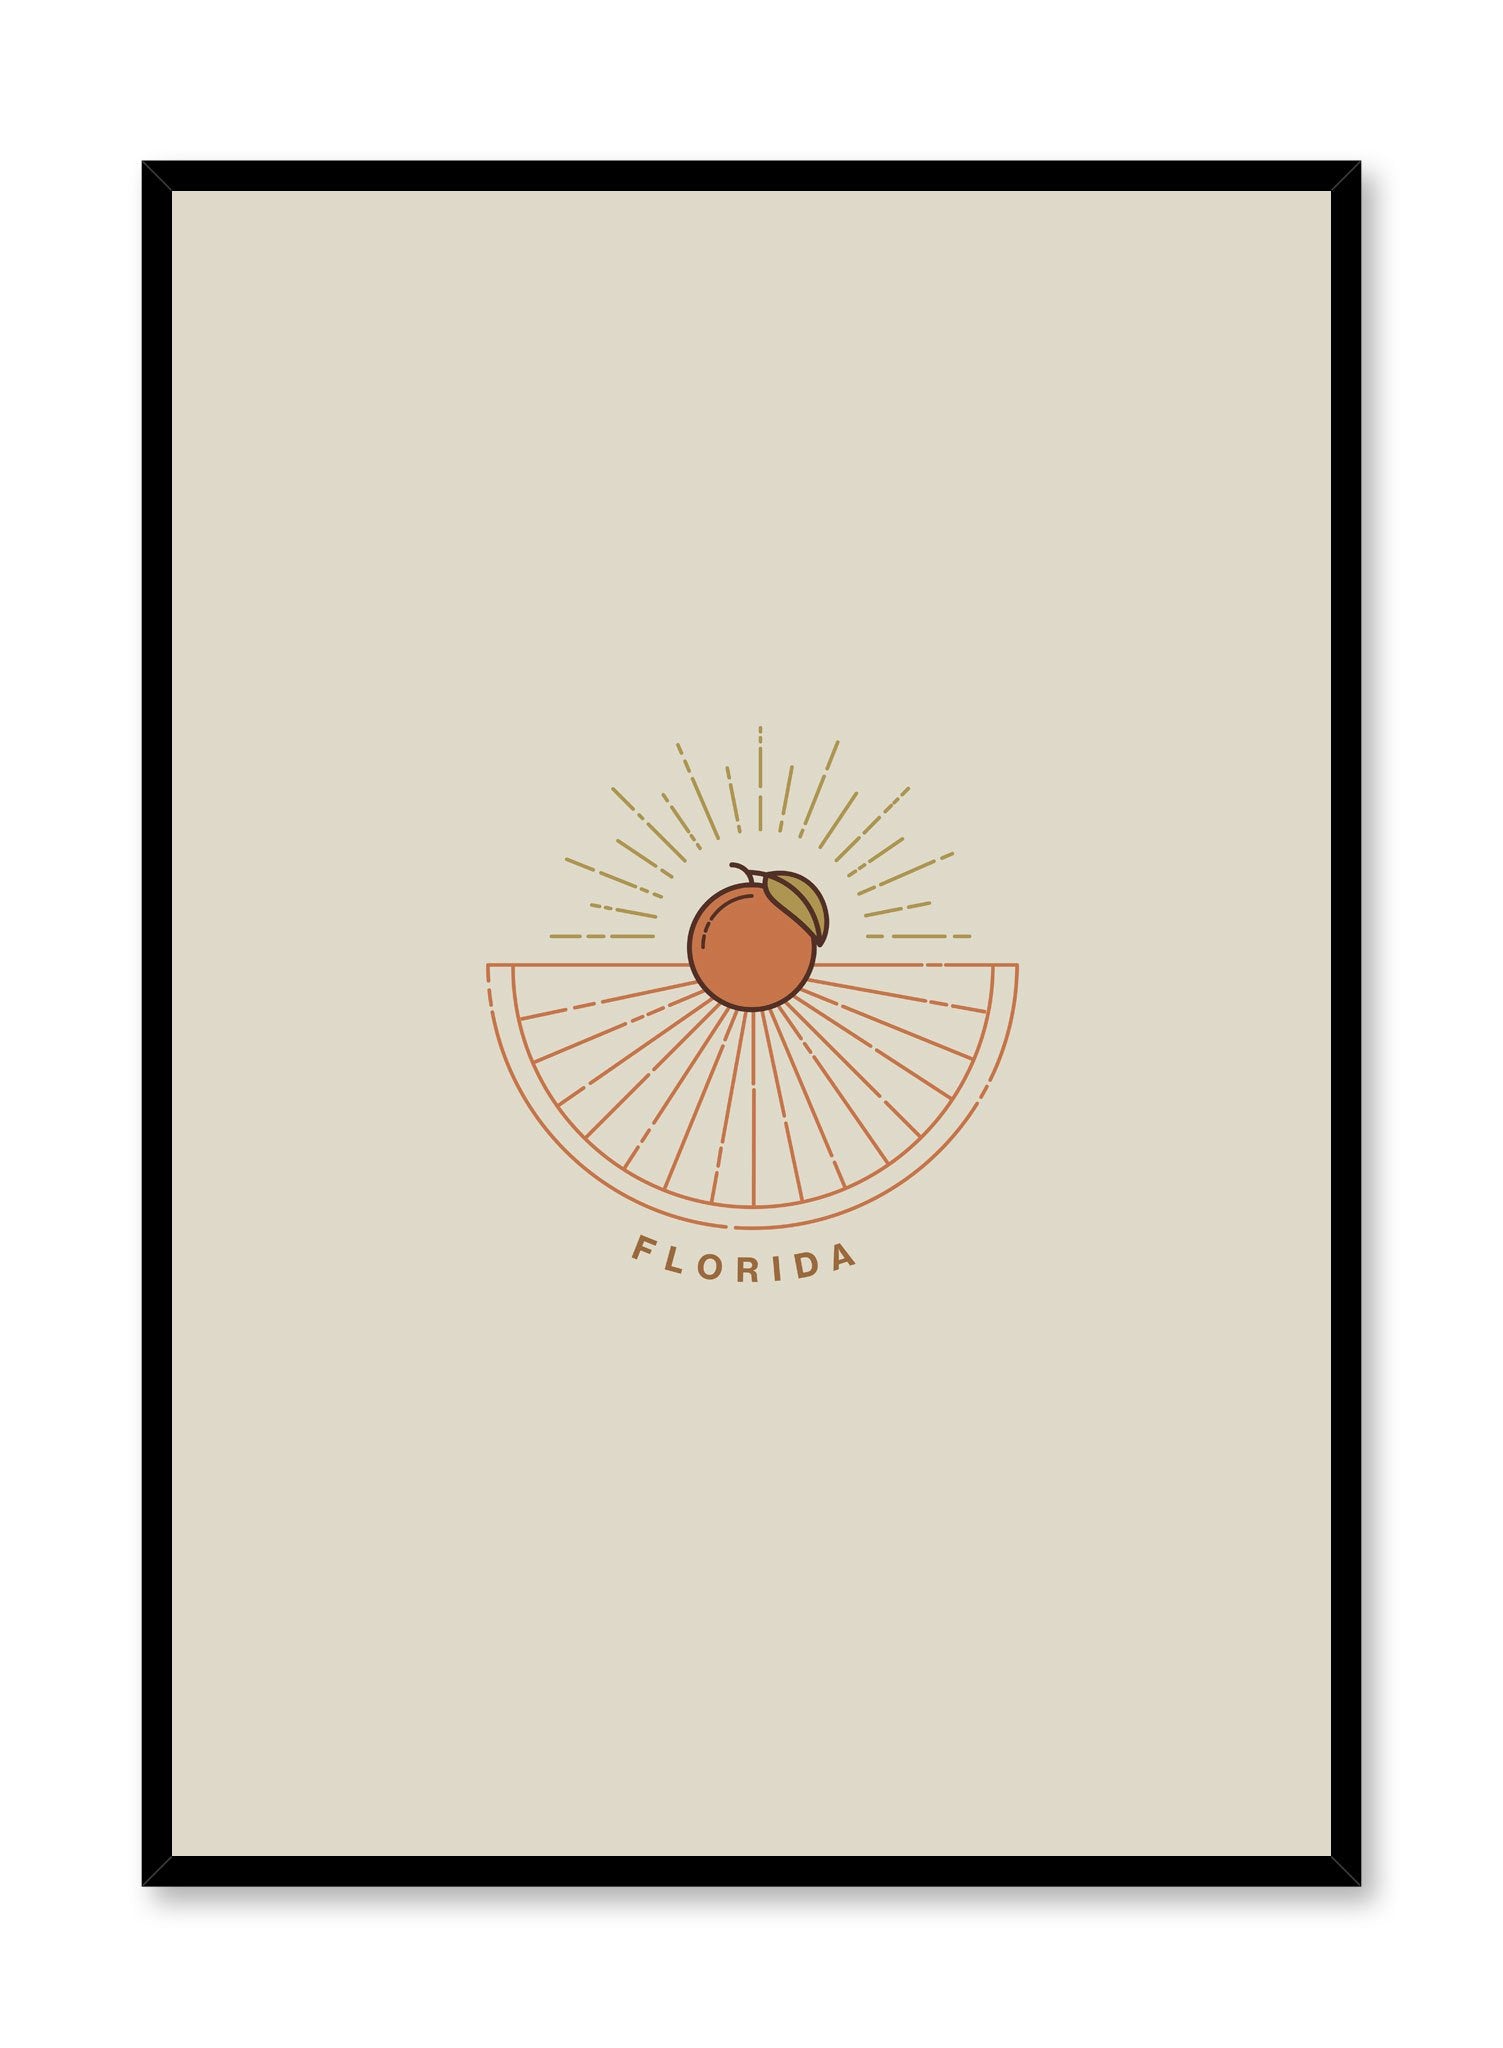 Minimalist design poster by Opposite Wall with Florida abstract graphic design of landscape and oranges